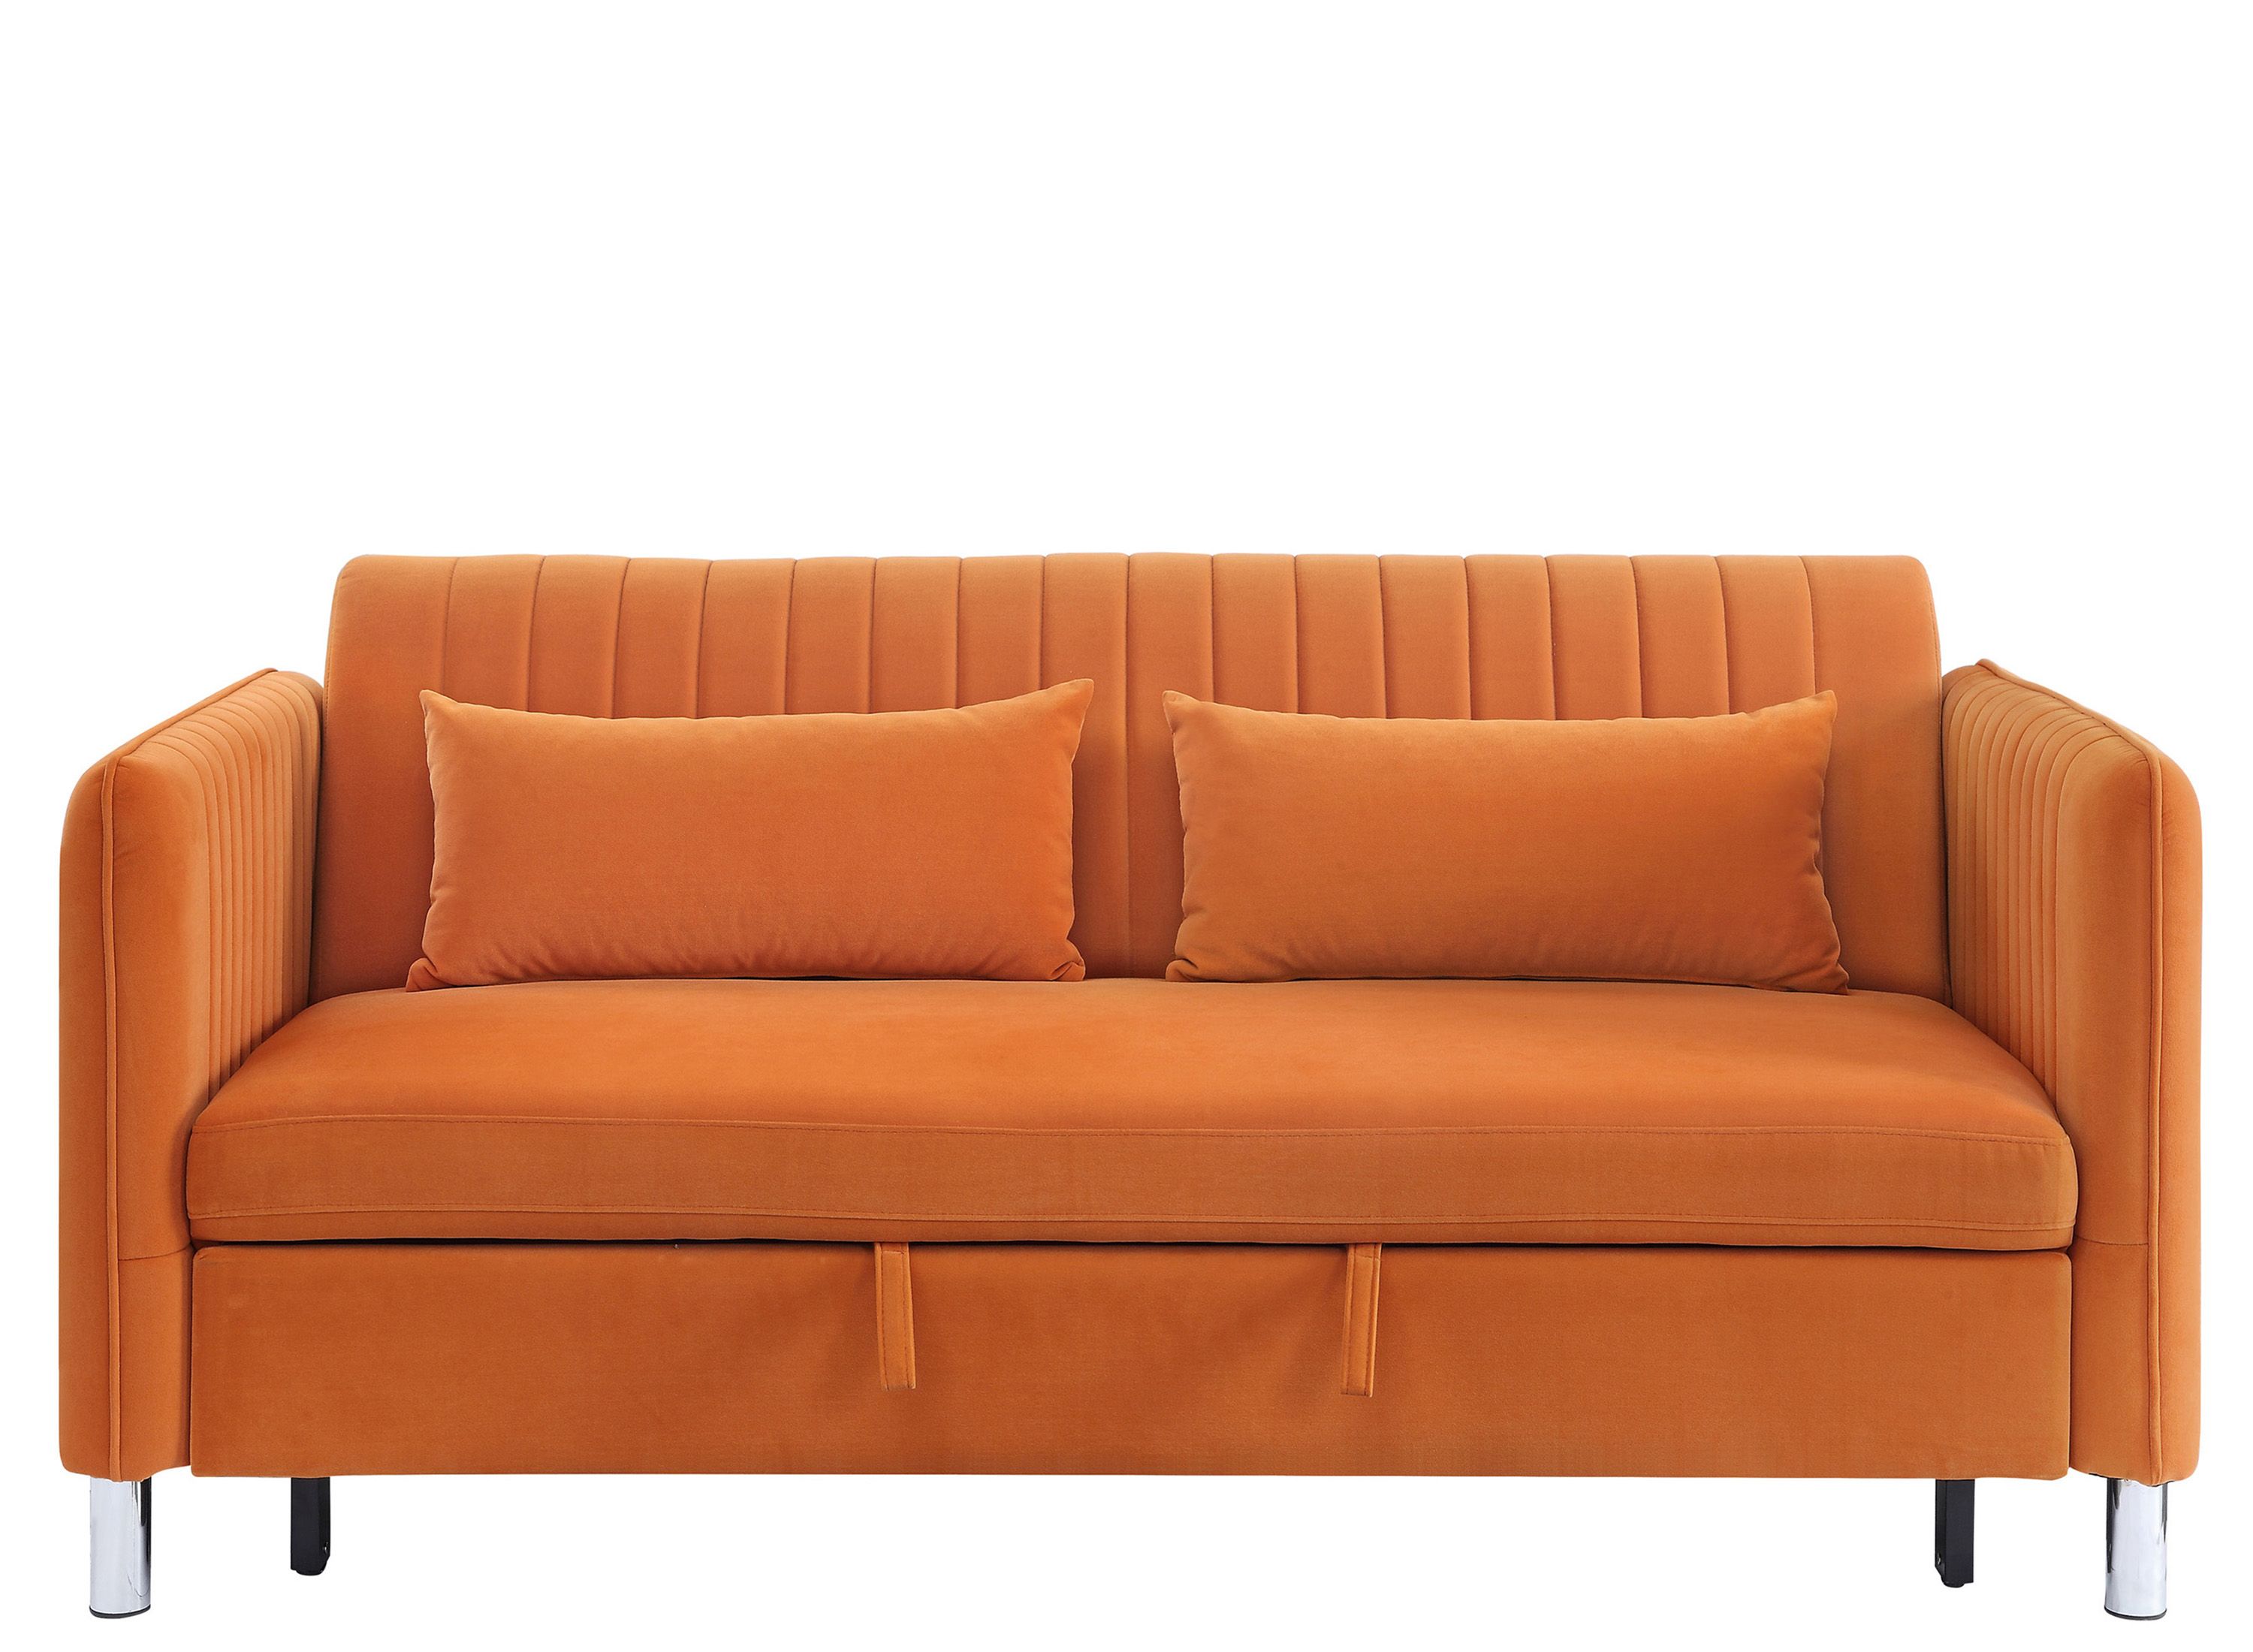 Hume Klick-Klack Sofa with Pull-Out Bed | Raymour & Flanigan